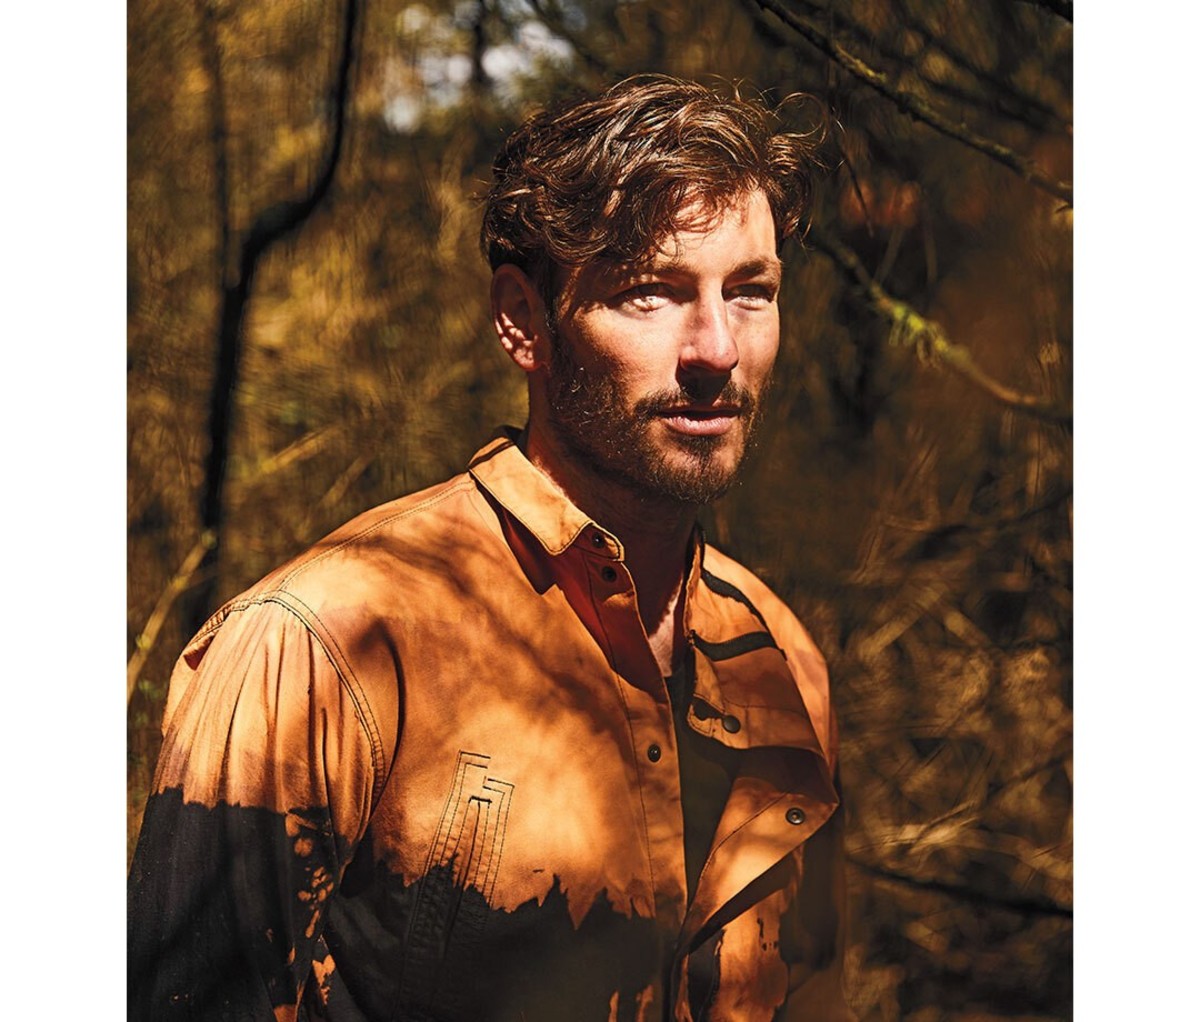 Man in the woods wearing a brown shirt